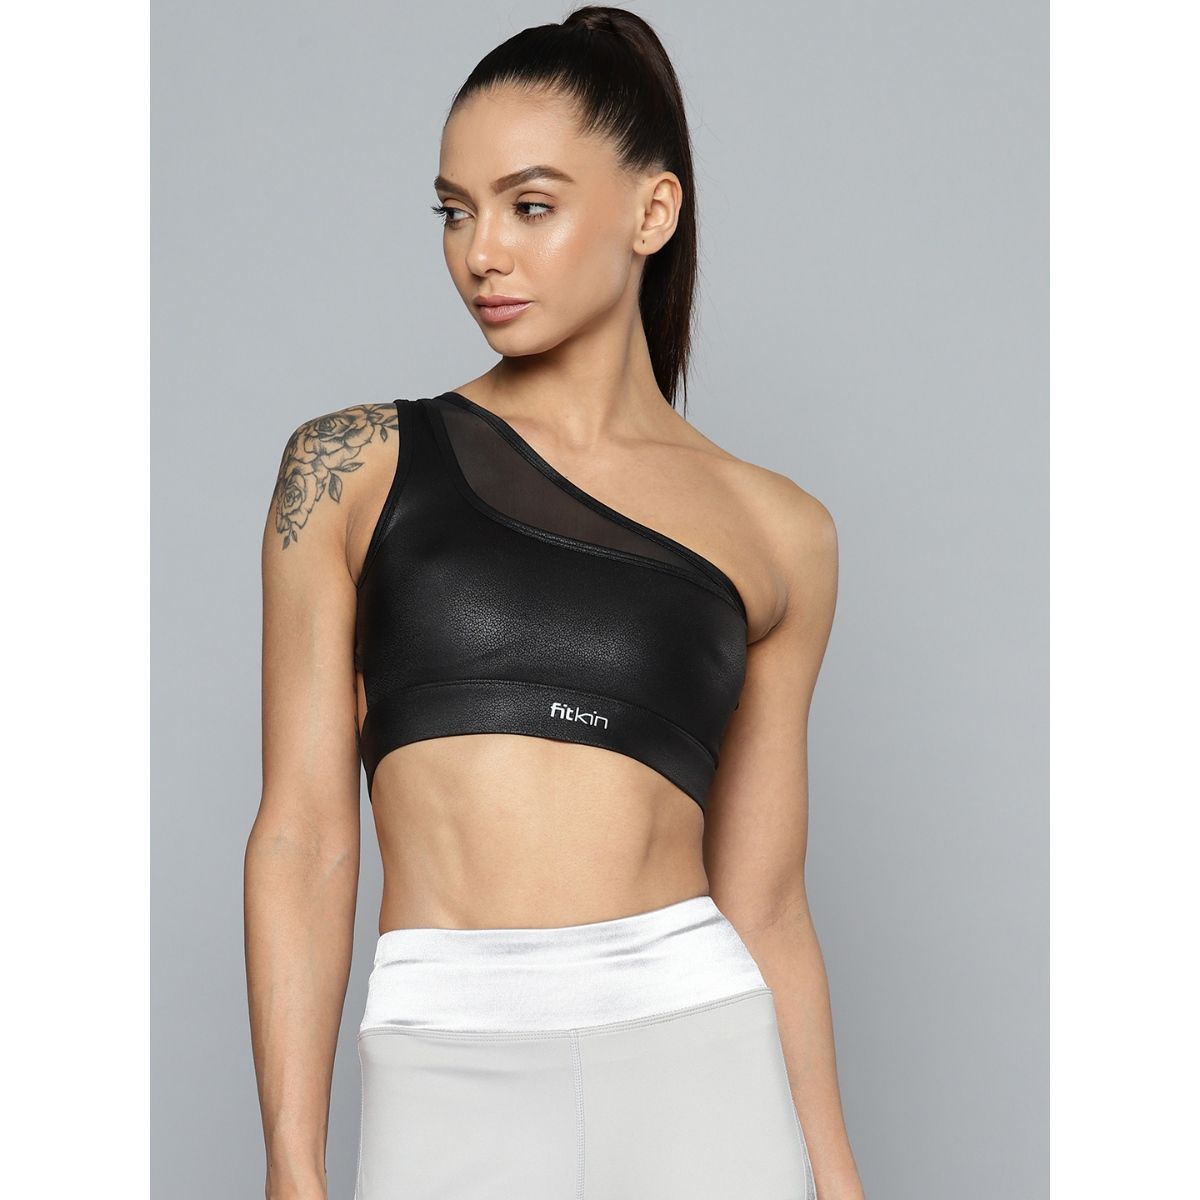 Buy Fitkin Printed One Shoulder Sports Bra Running Workout Yoga online